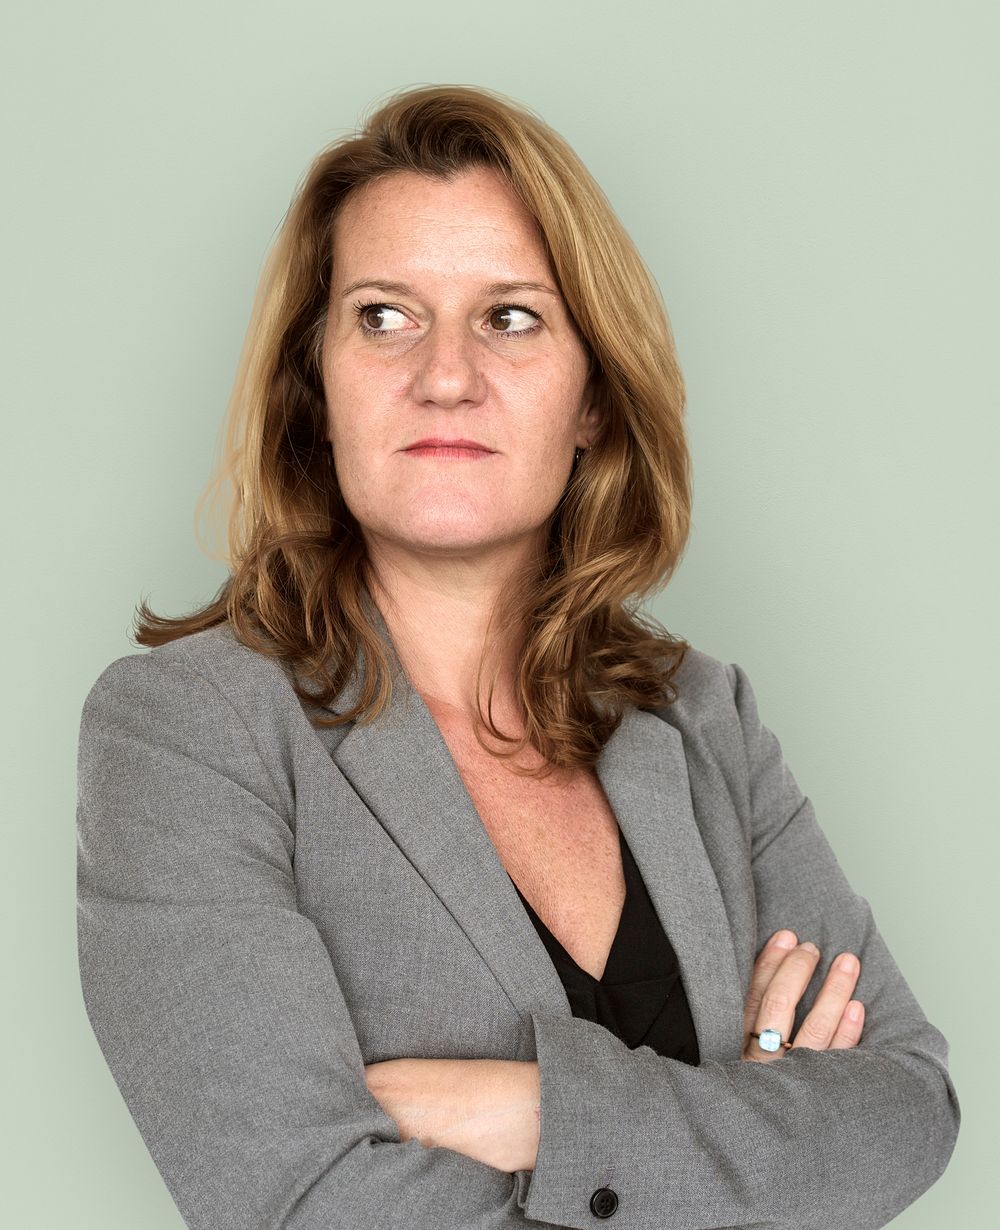 Adult woman corporate crossed arms portrait